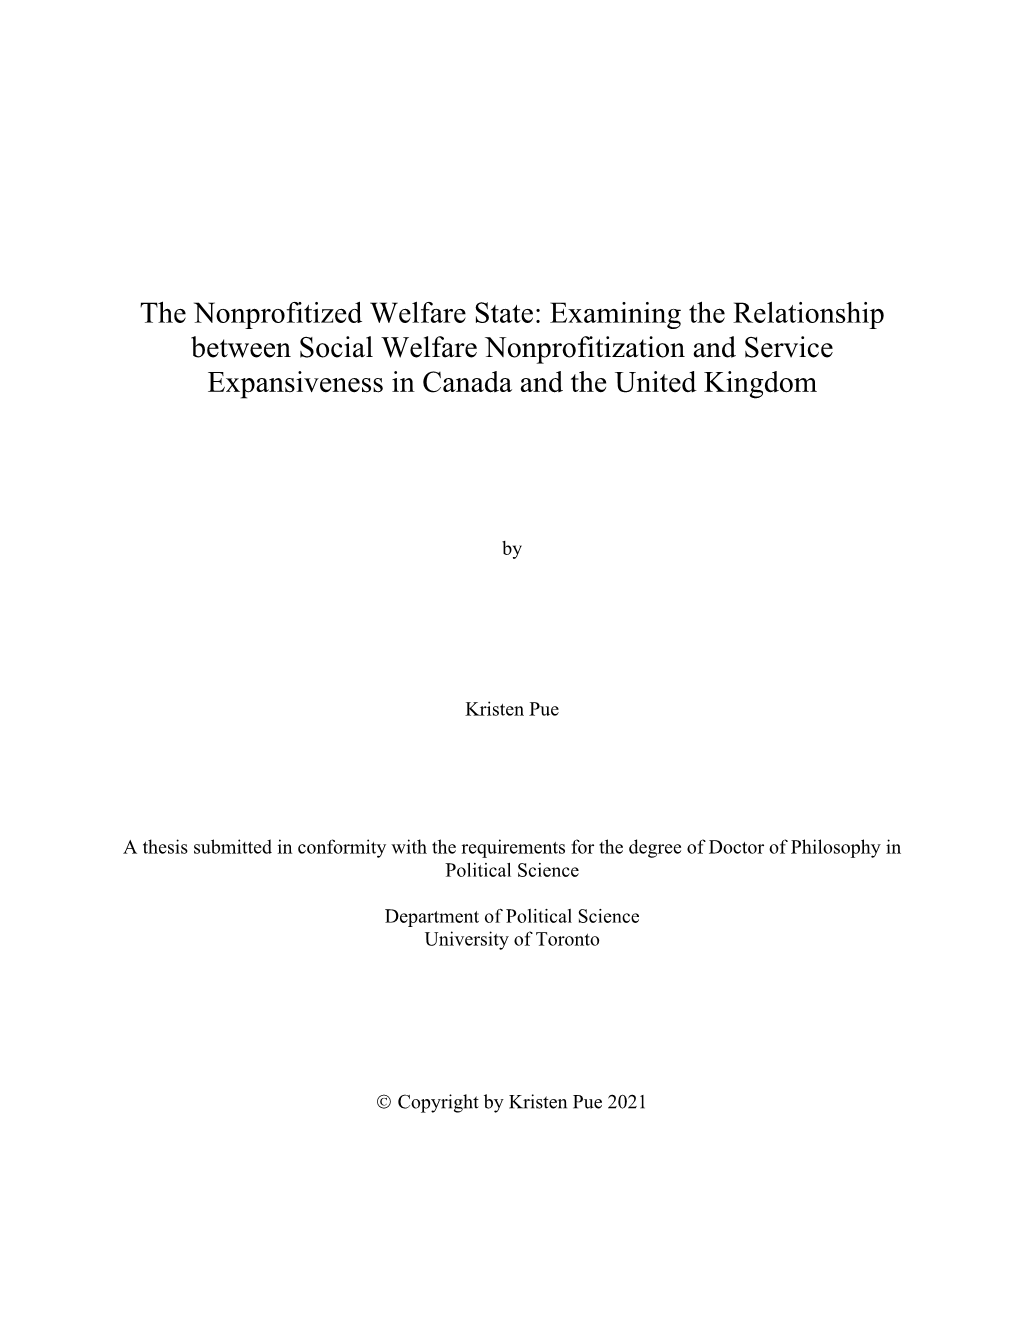 Examining the Relationship Between Social Welfare Nonprofitization and Service Expansiveness in Canada and the United Kingdom